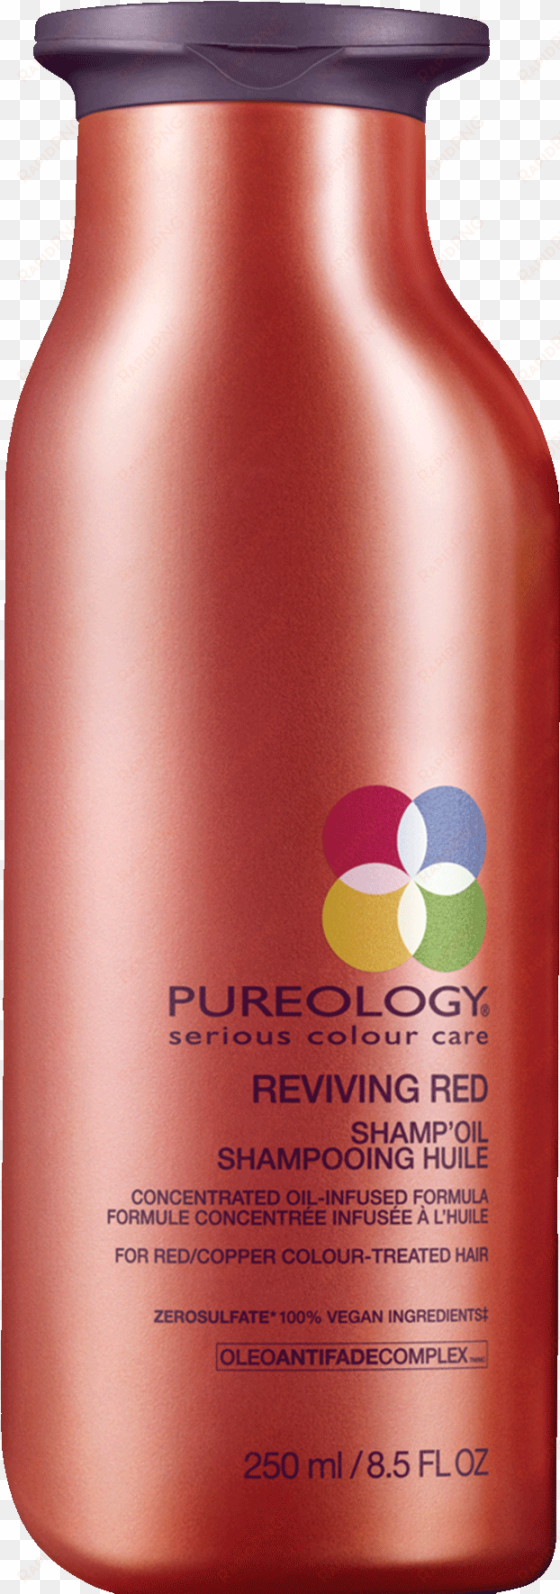 reviving red shampoo oil - pureology reviving red shamp'oil